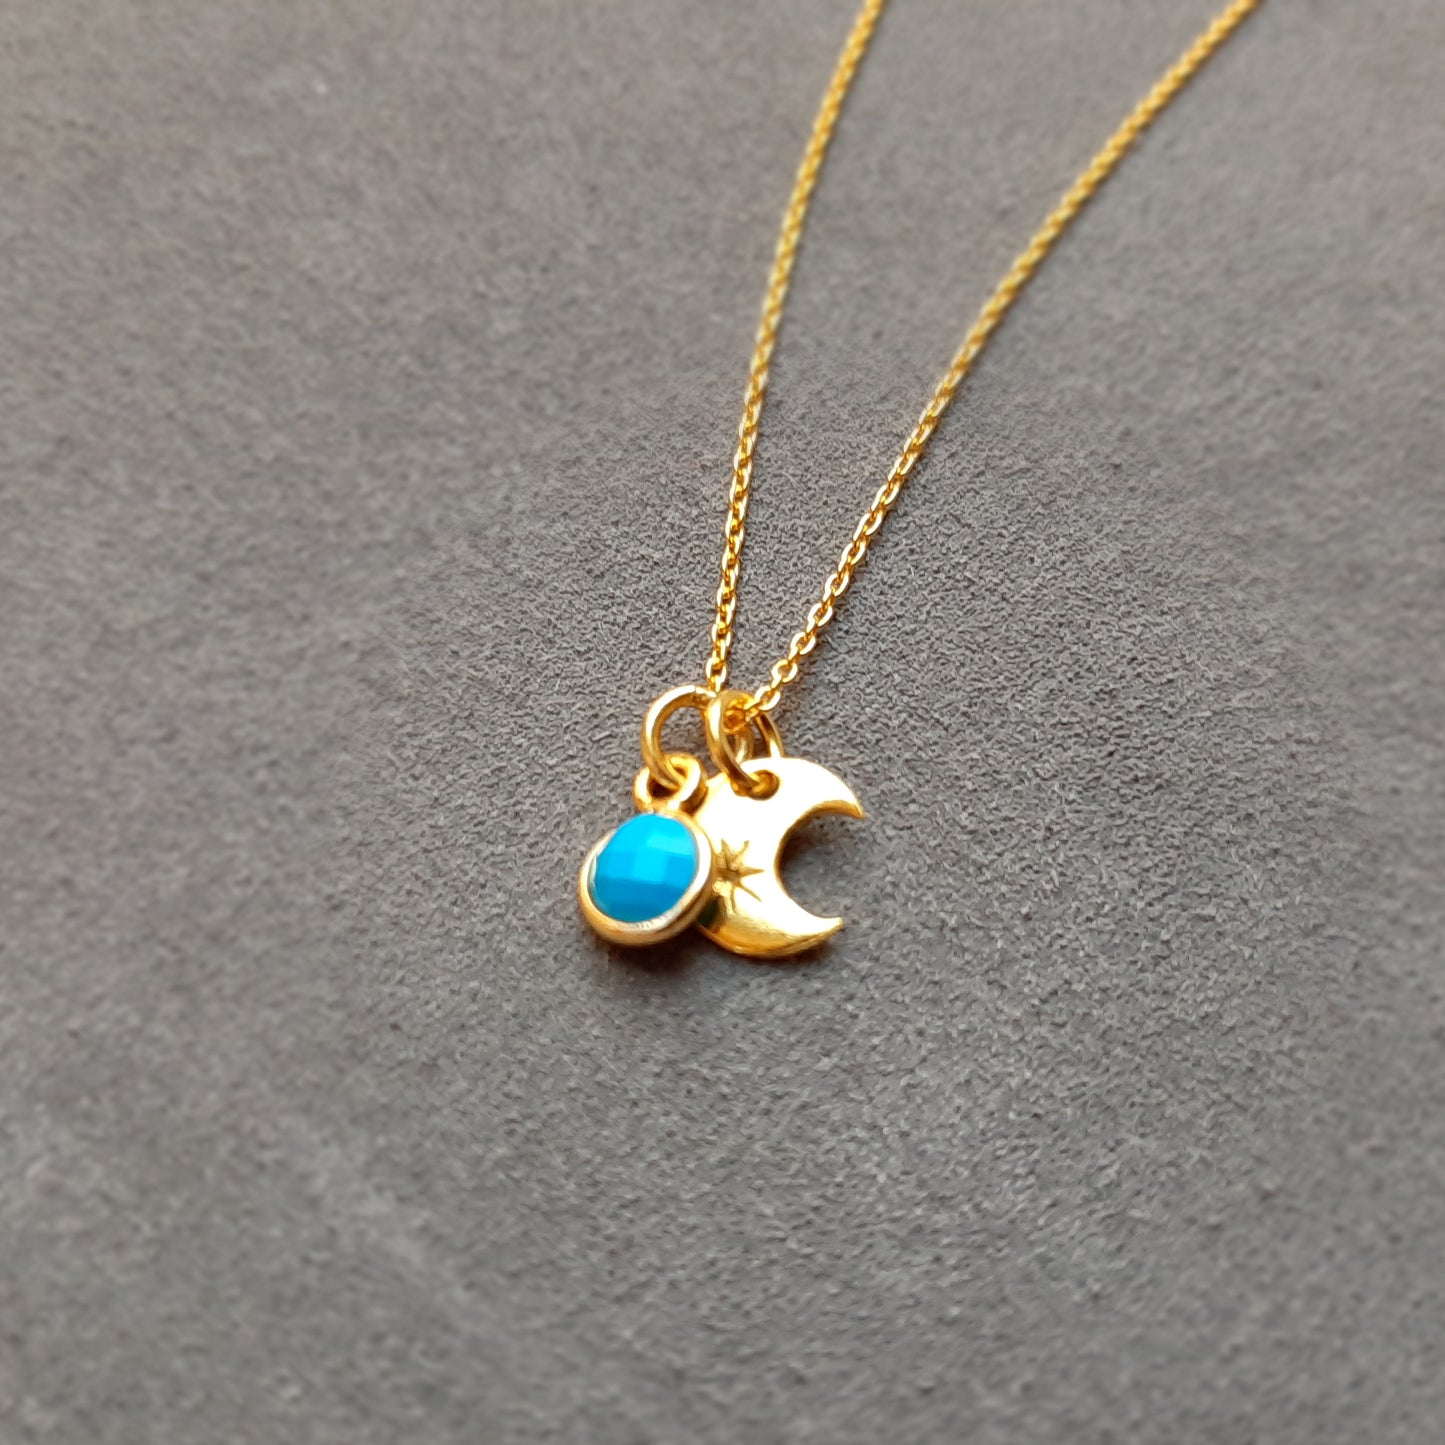 Dainty turquoise Moon phase necklace gold vermeil silver